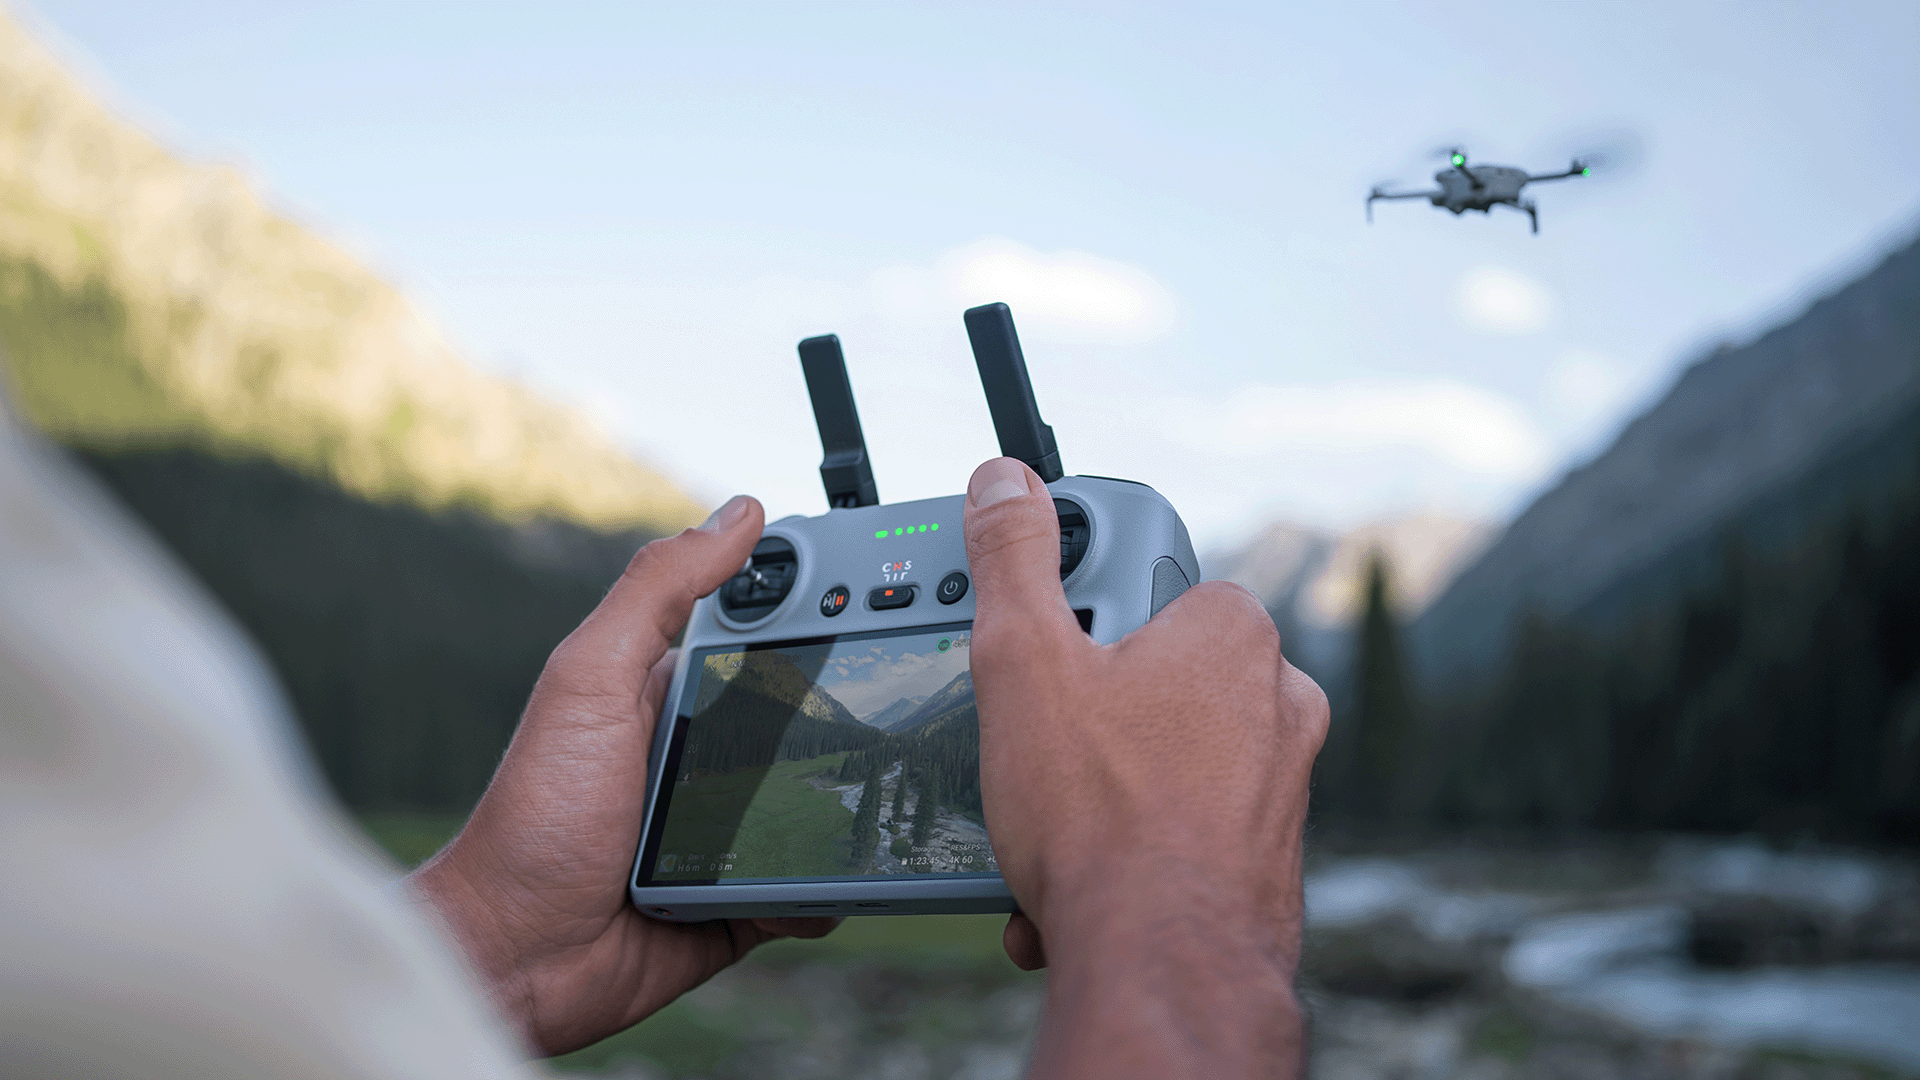 How to register as a drone operator in the EU